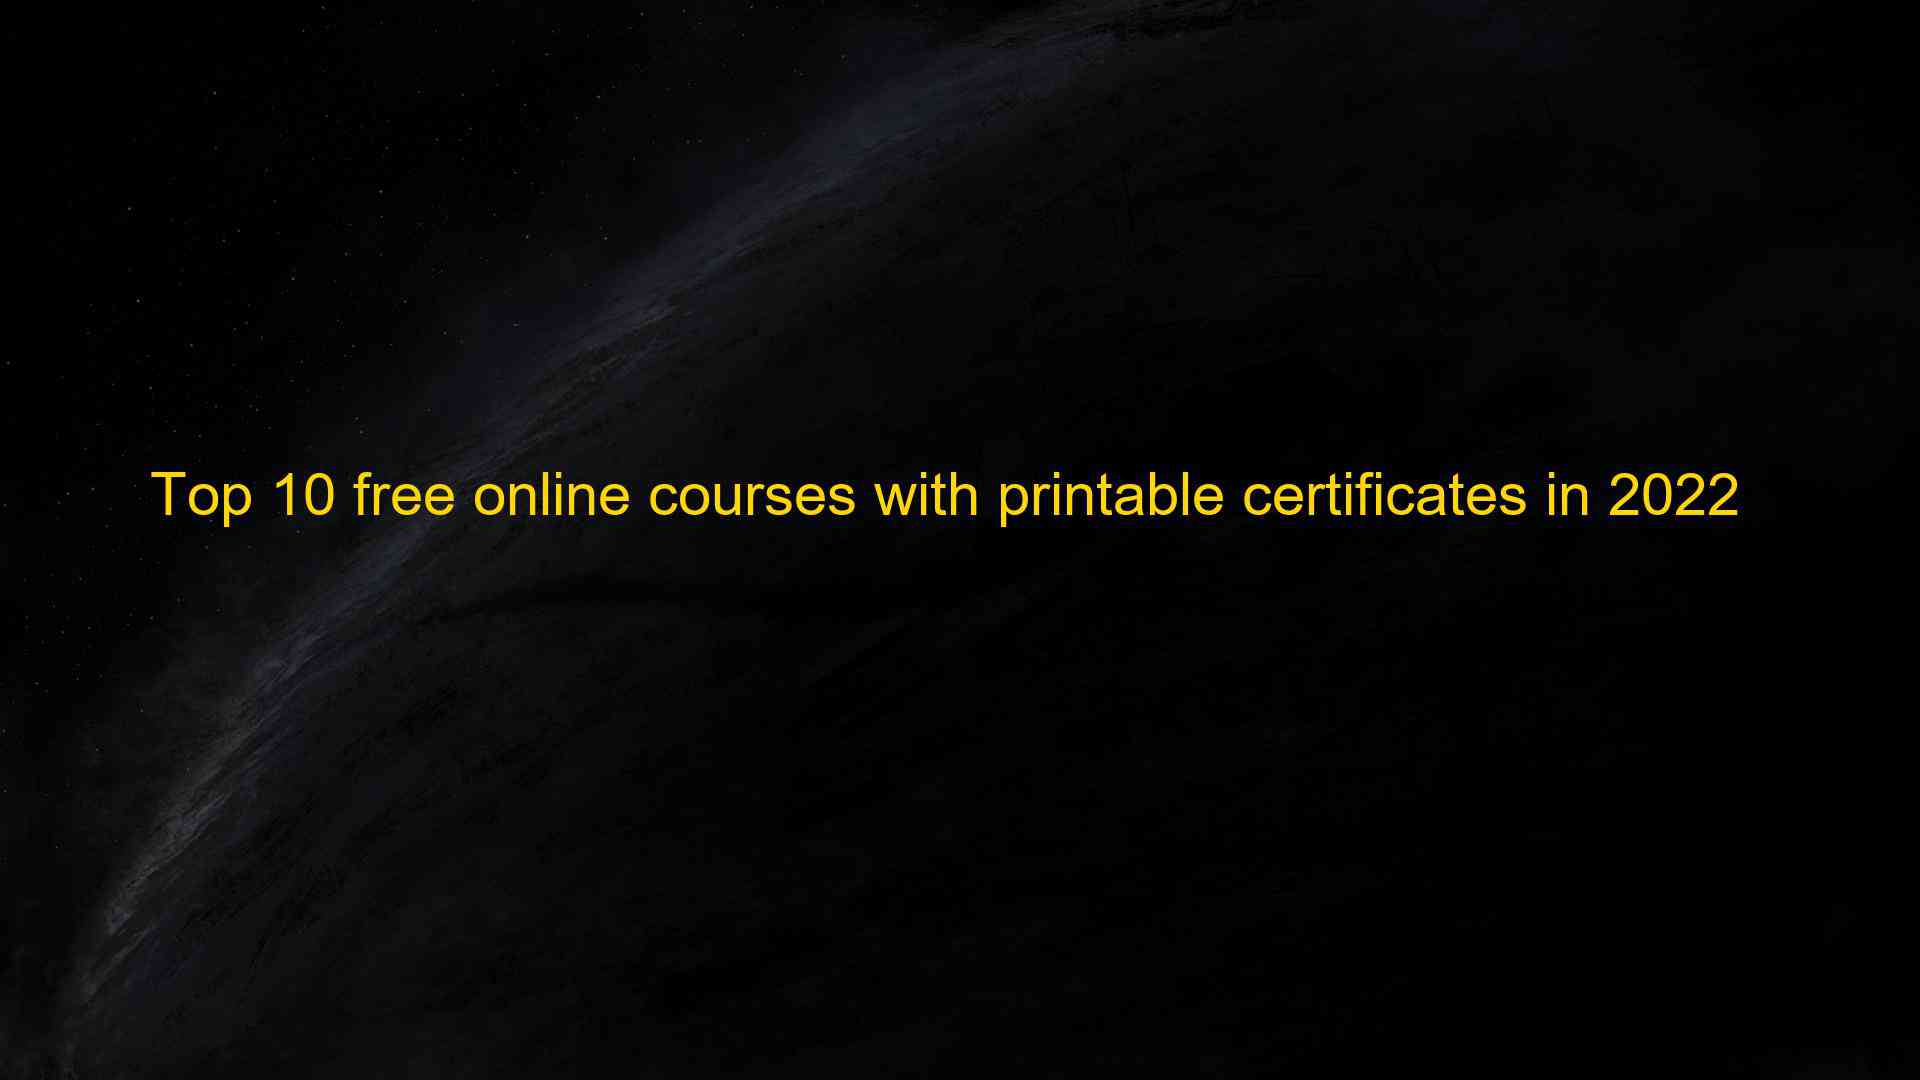 Top 10 free online courses with printable certificates in 2022 1660909582